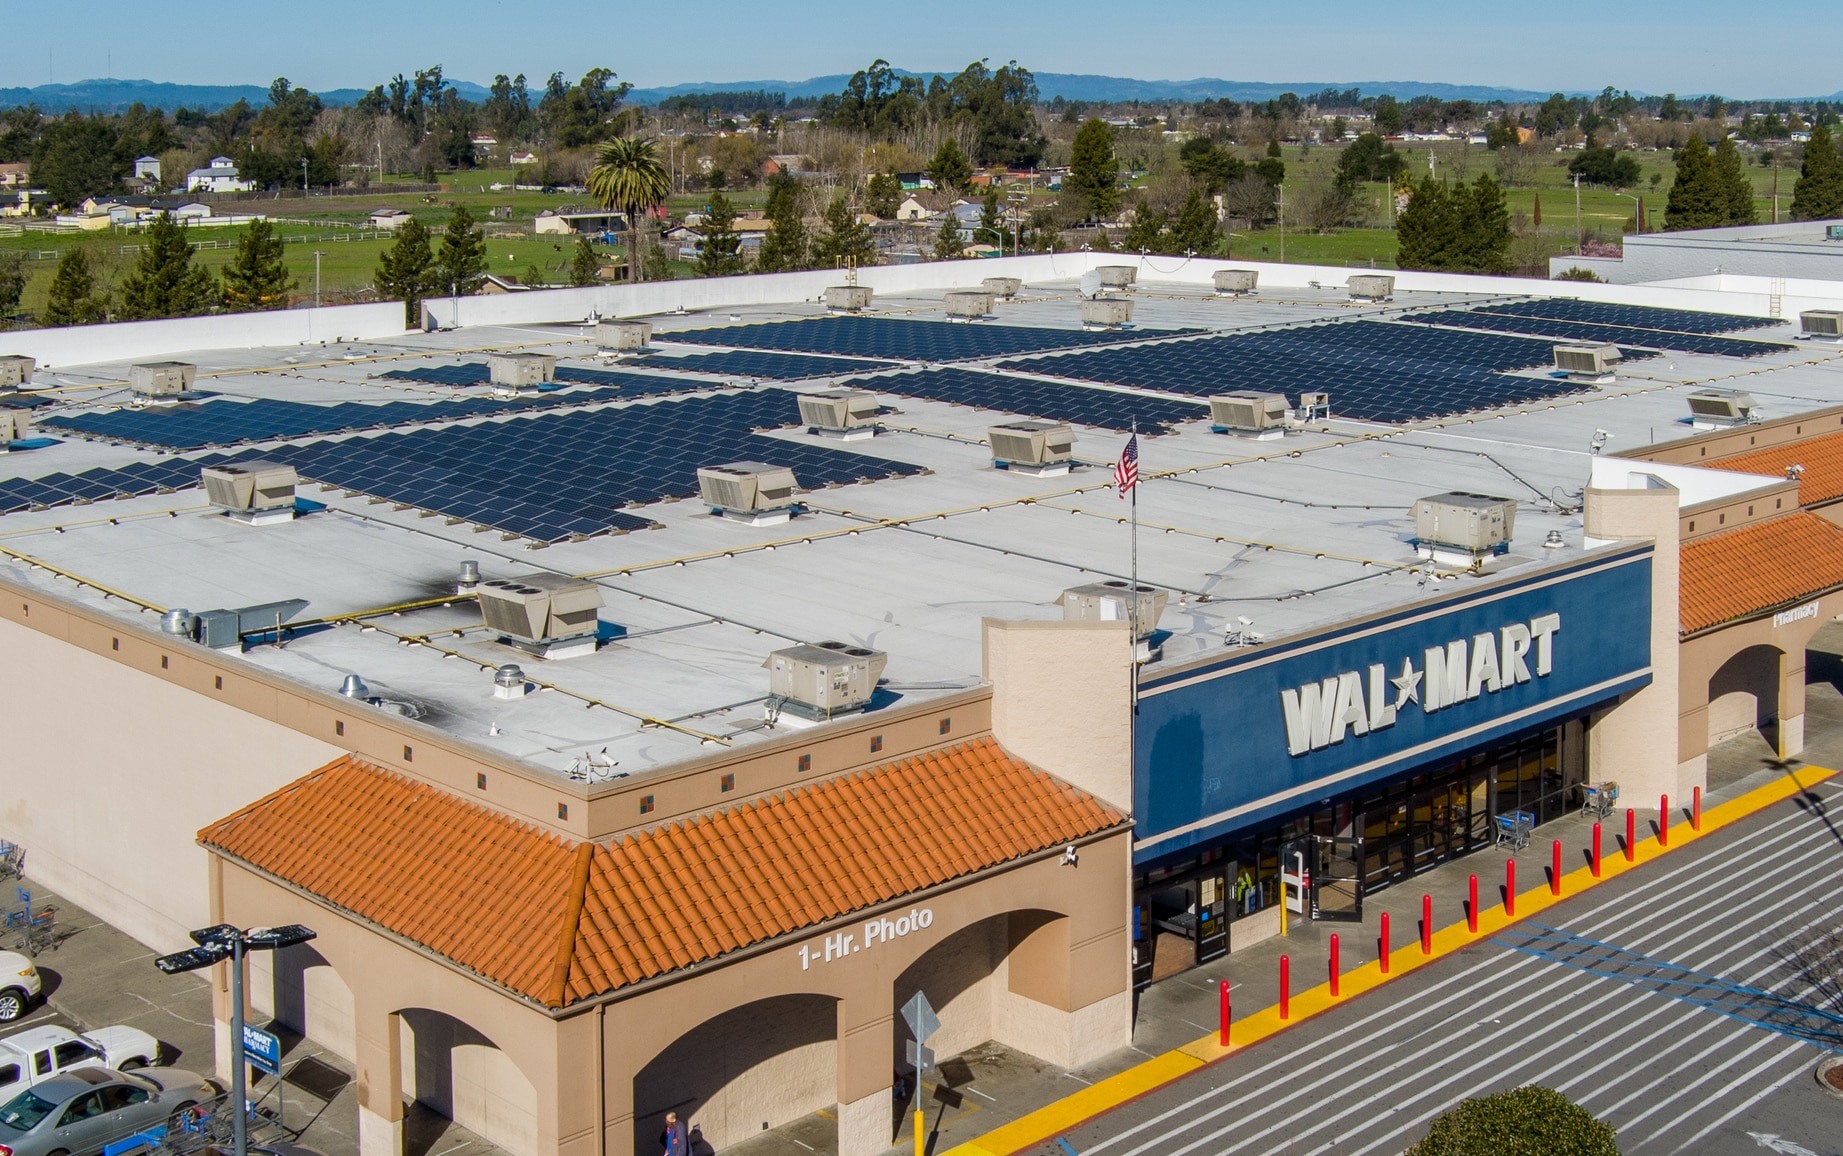 An aerial of a Walmart store in Northern California with signage logo at the front entrance. The store has solar panels on the roof.